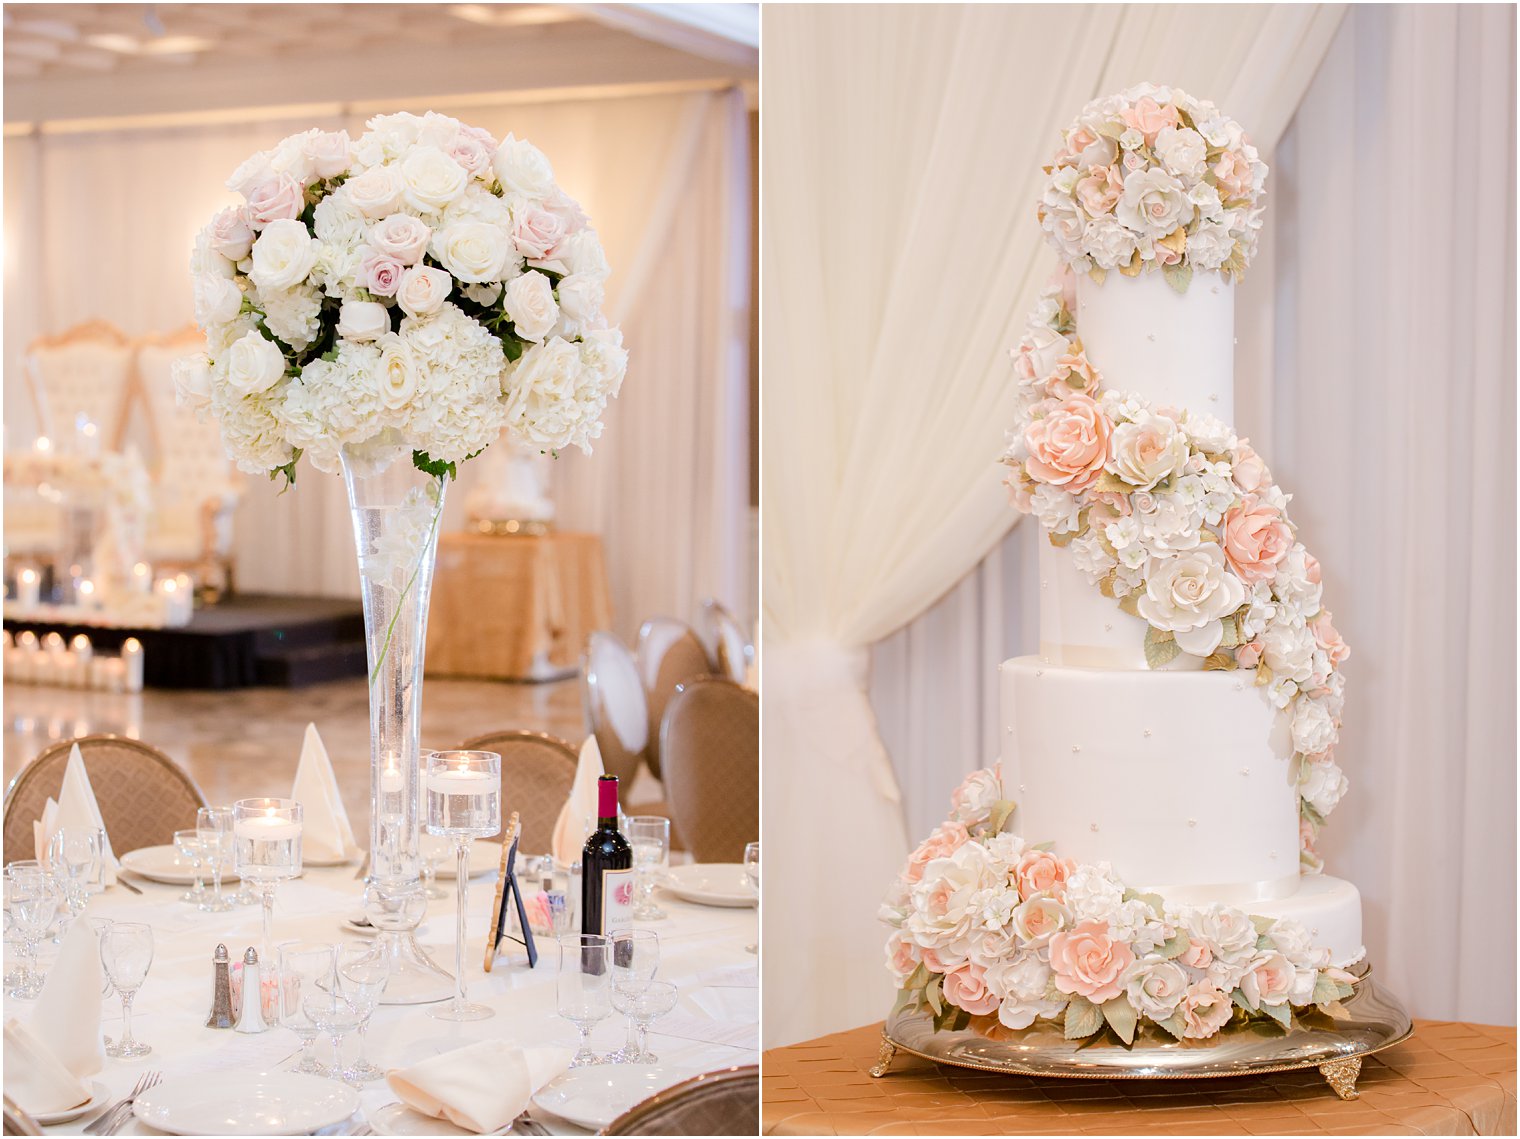 beautiful flowers and cake at Brooklyn wedding